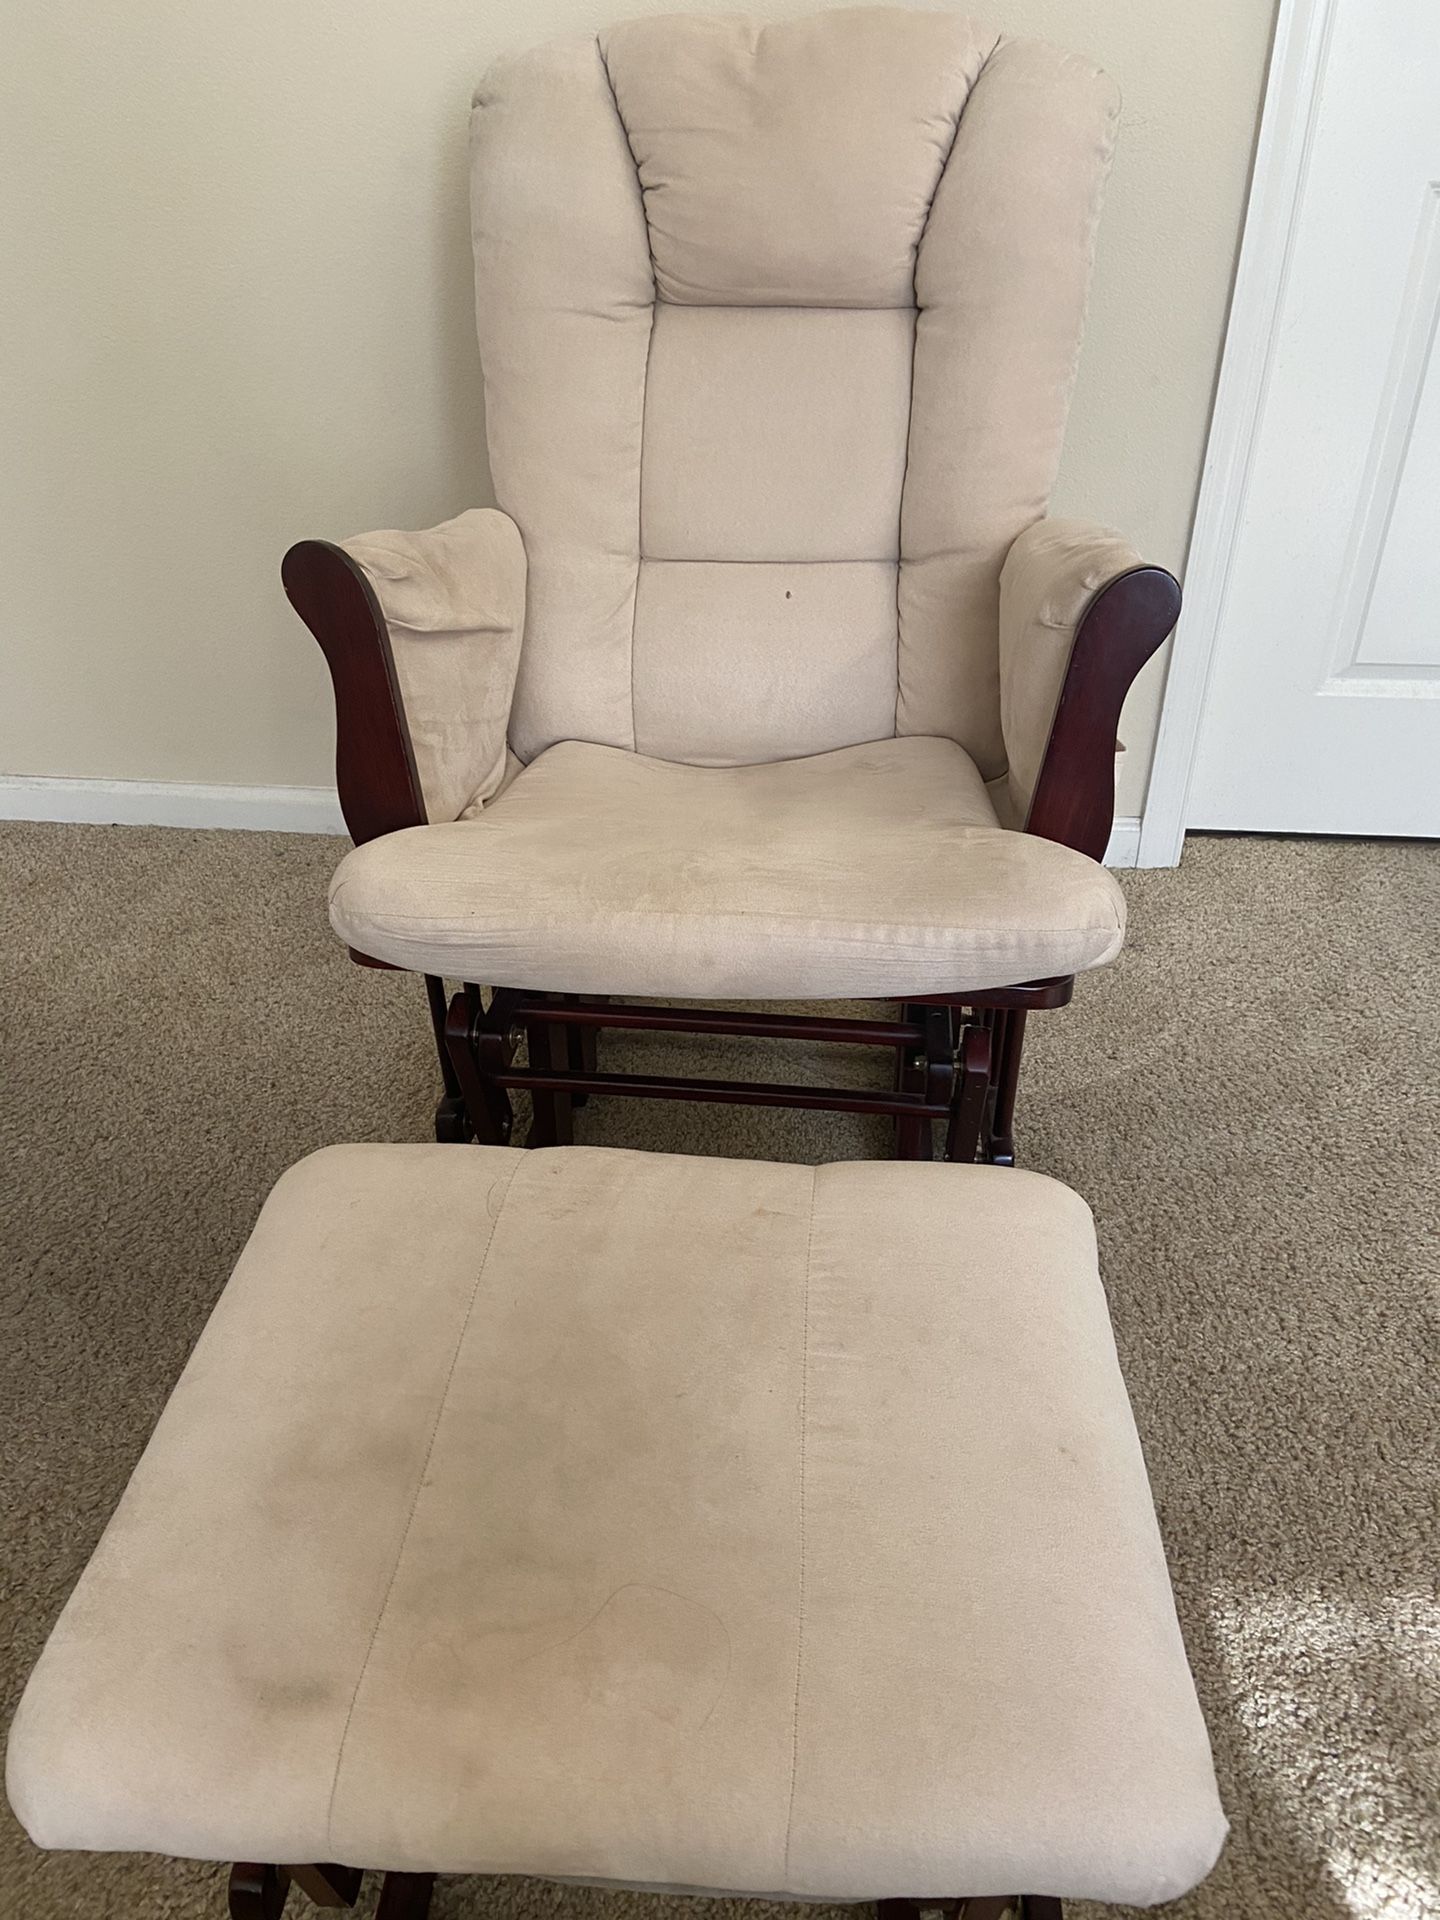 FREE Rocking Chair/Glider And Ottoman